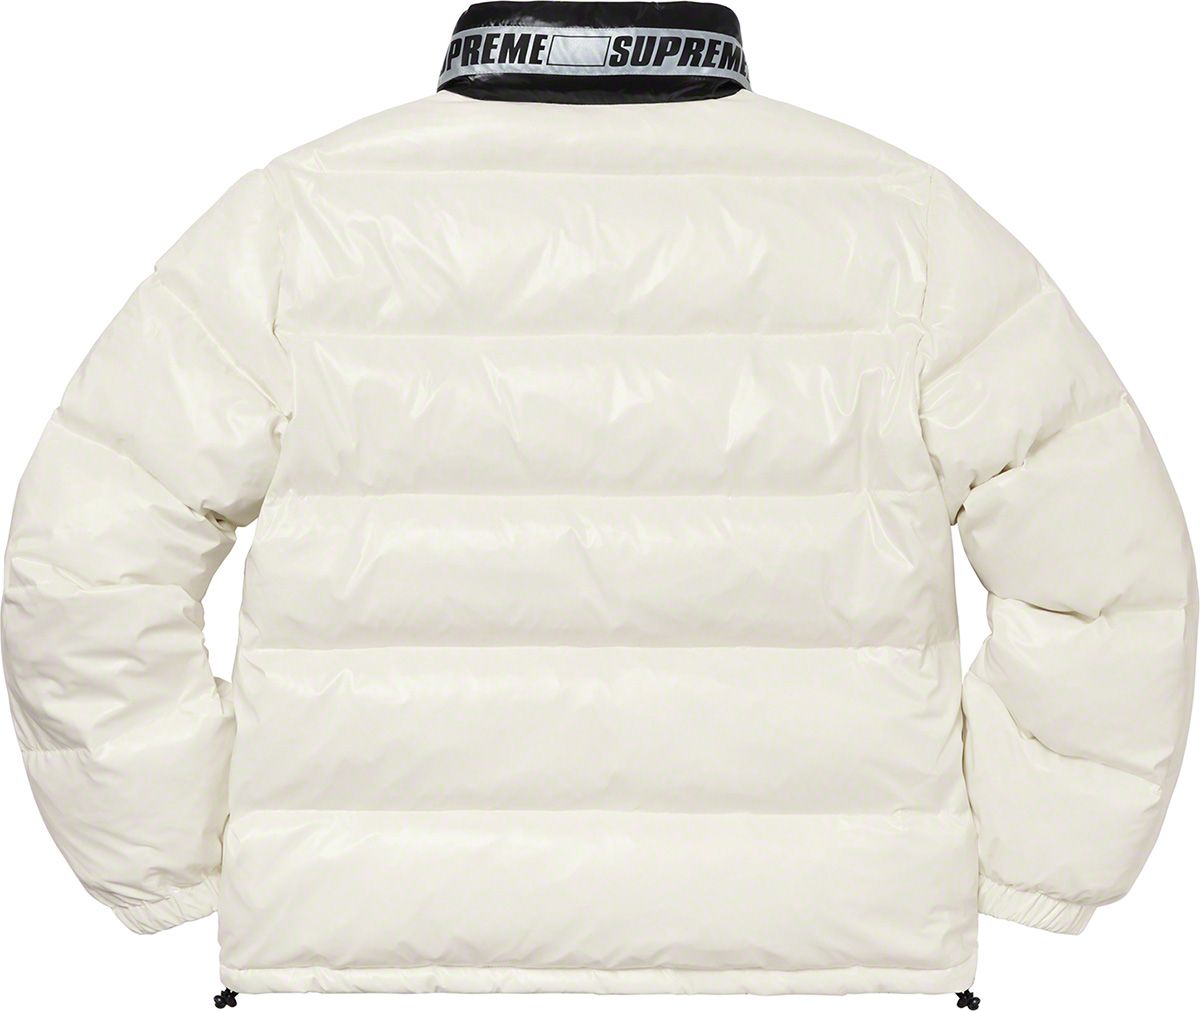 Shiny Reversible Puffy Jacket - Spring/Summer 2020 Preview – Supreme